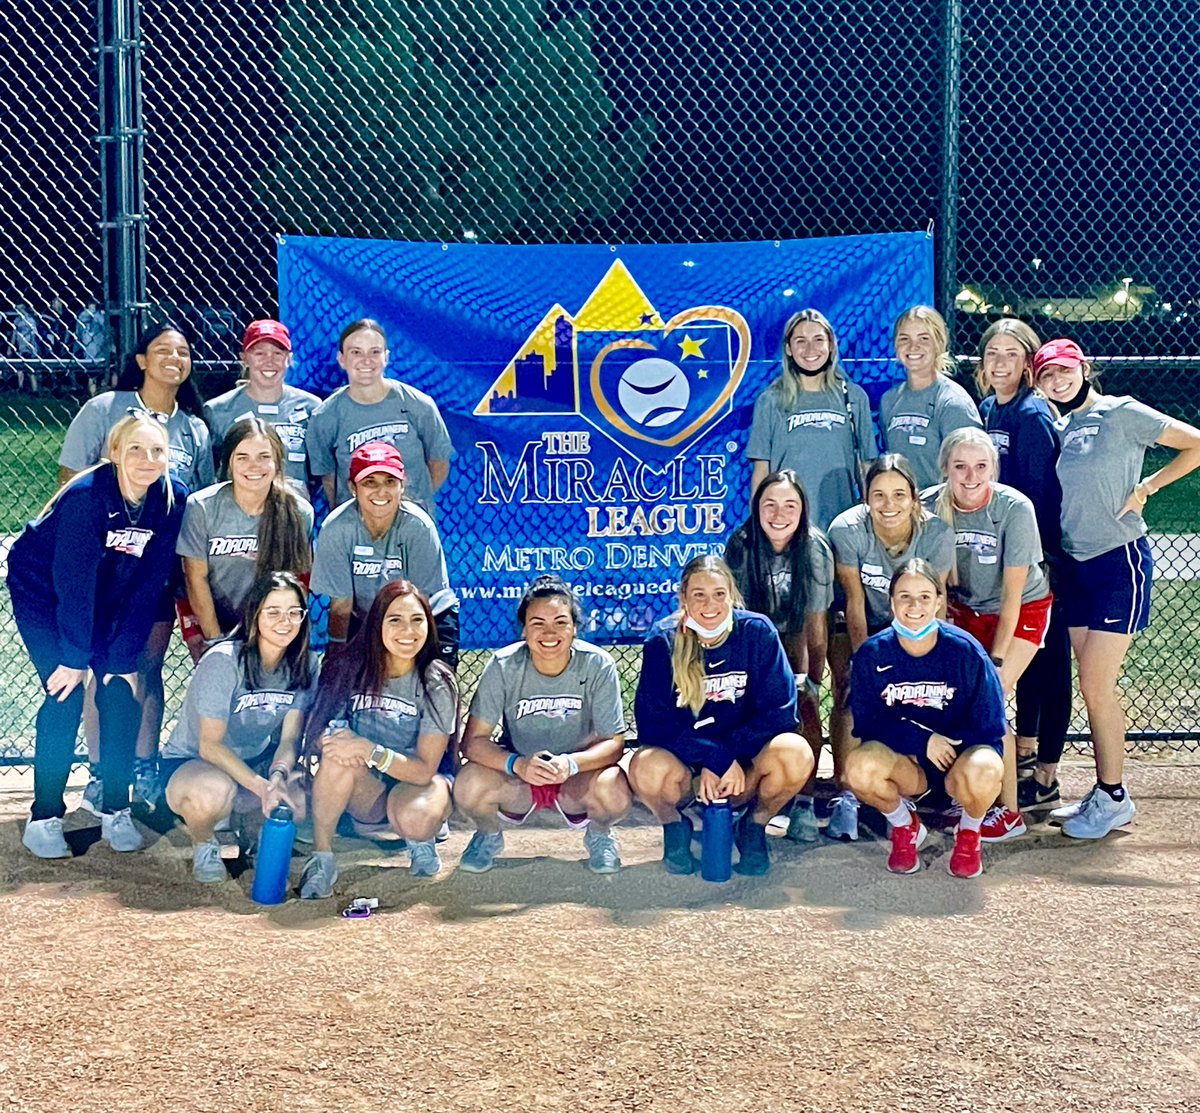 Msu Denver Softball We Loved Working With The Athletes Of Miracledenver Last Night Under The Lights Roadiessb22 Getrowdy